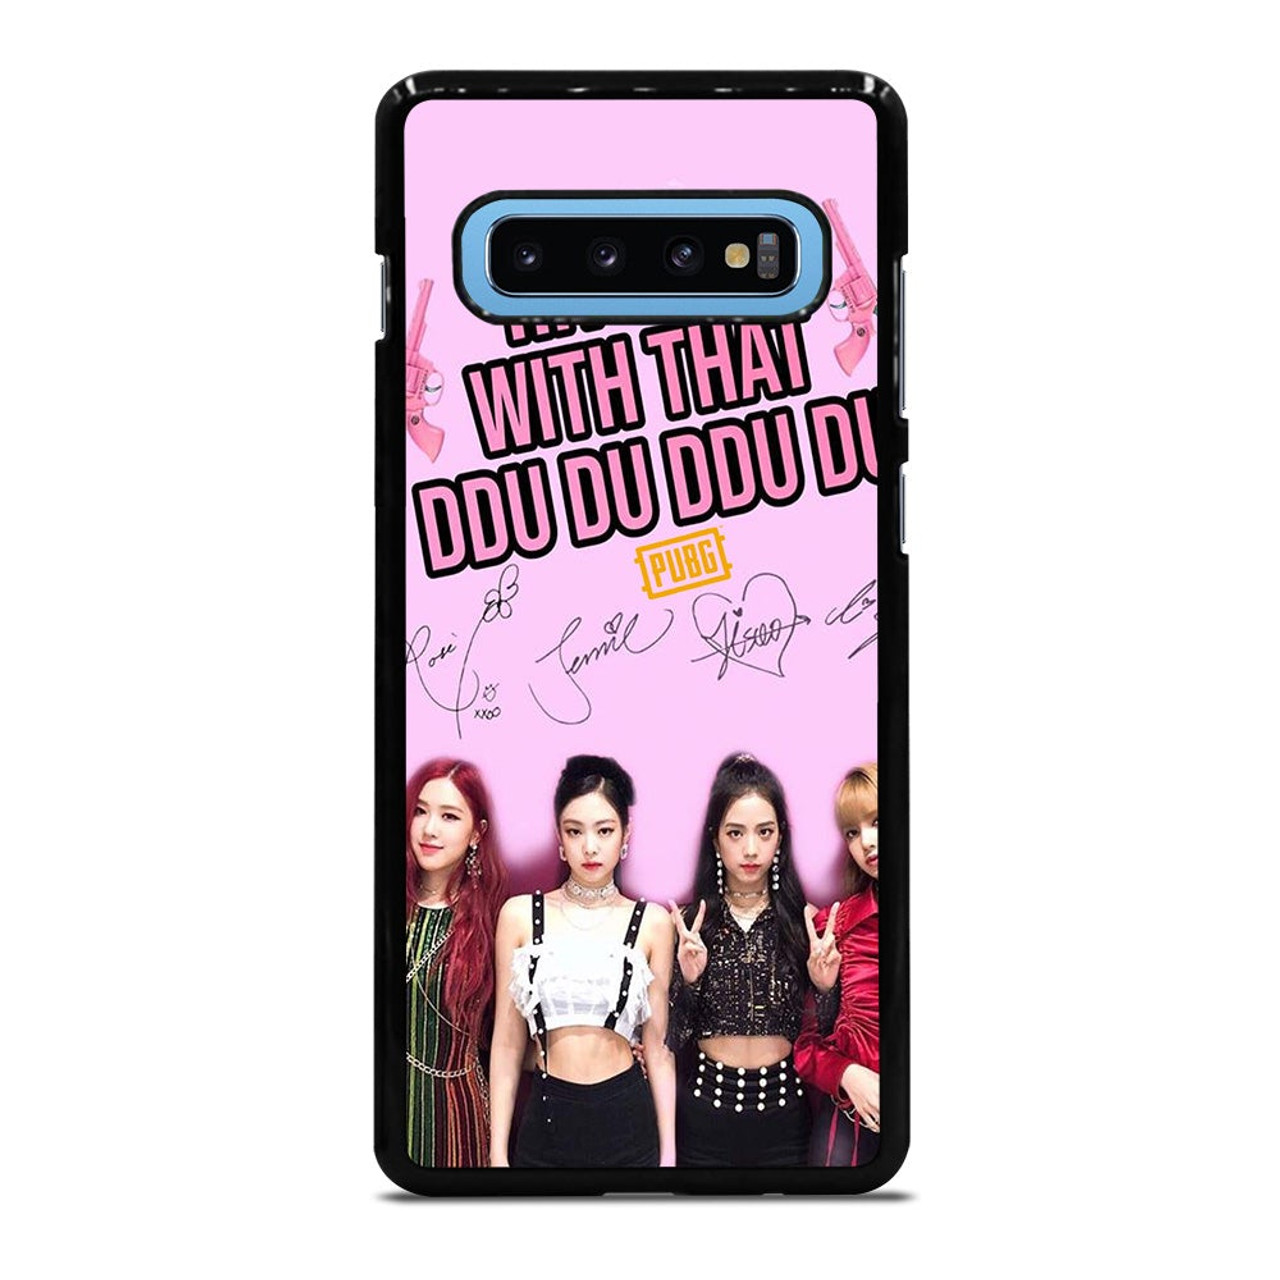 Keelholte Brutaal Mellow BLACKPINK PUBG GAME 3 Samsung Galaxy S10 Plus Case Cover